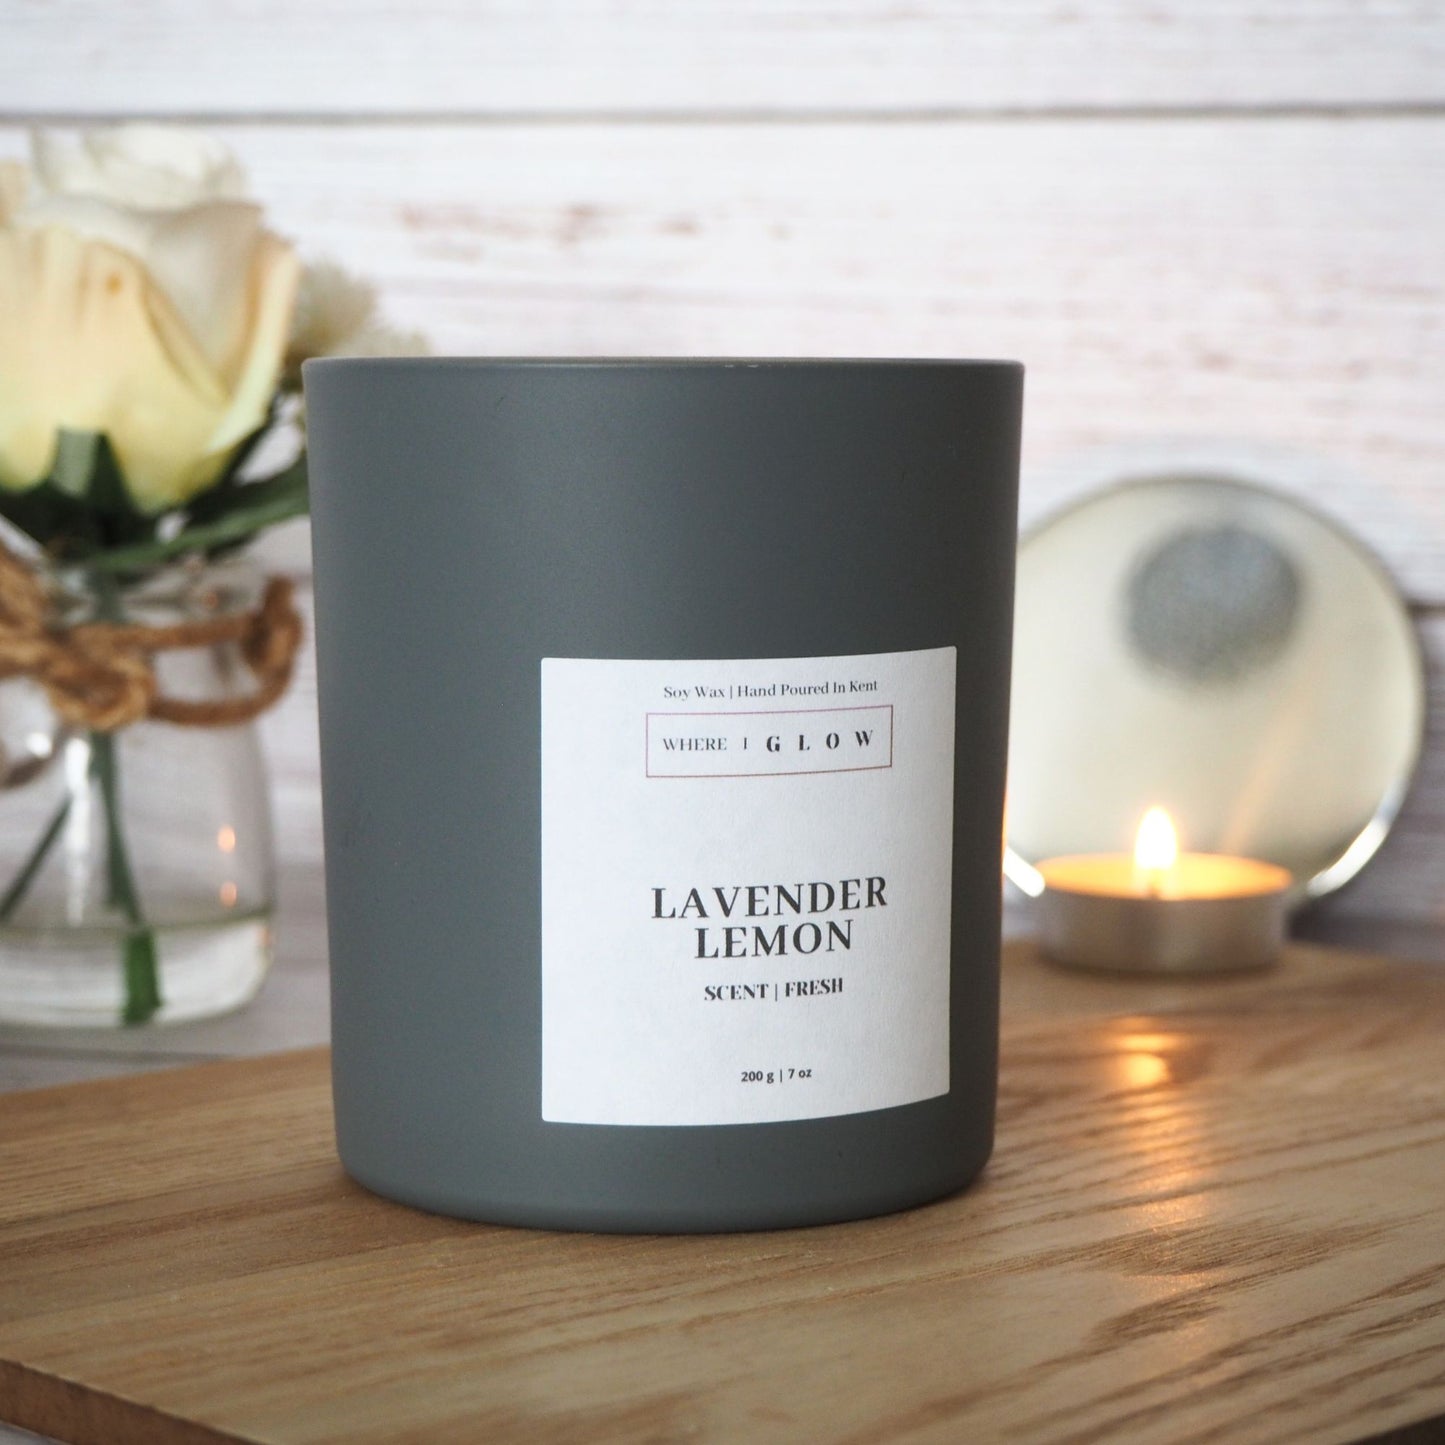 Lavender and Lemon Soy Candle 7 oz by Where I Glow